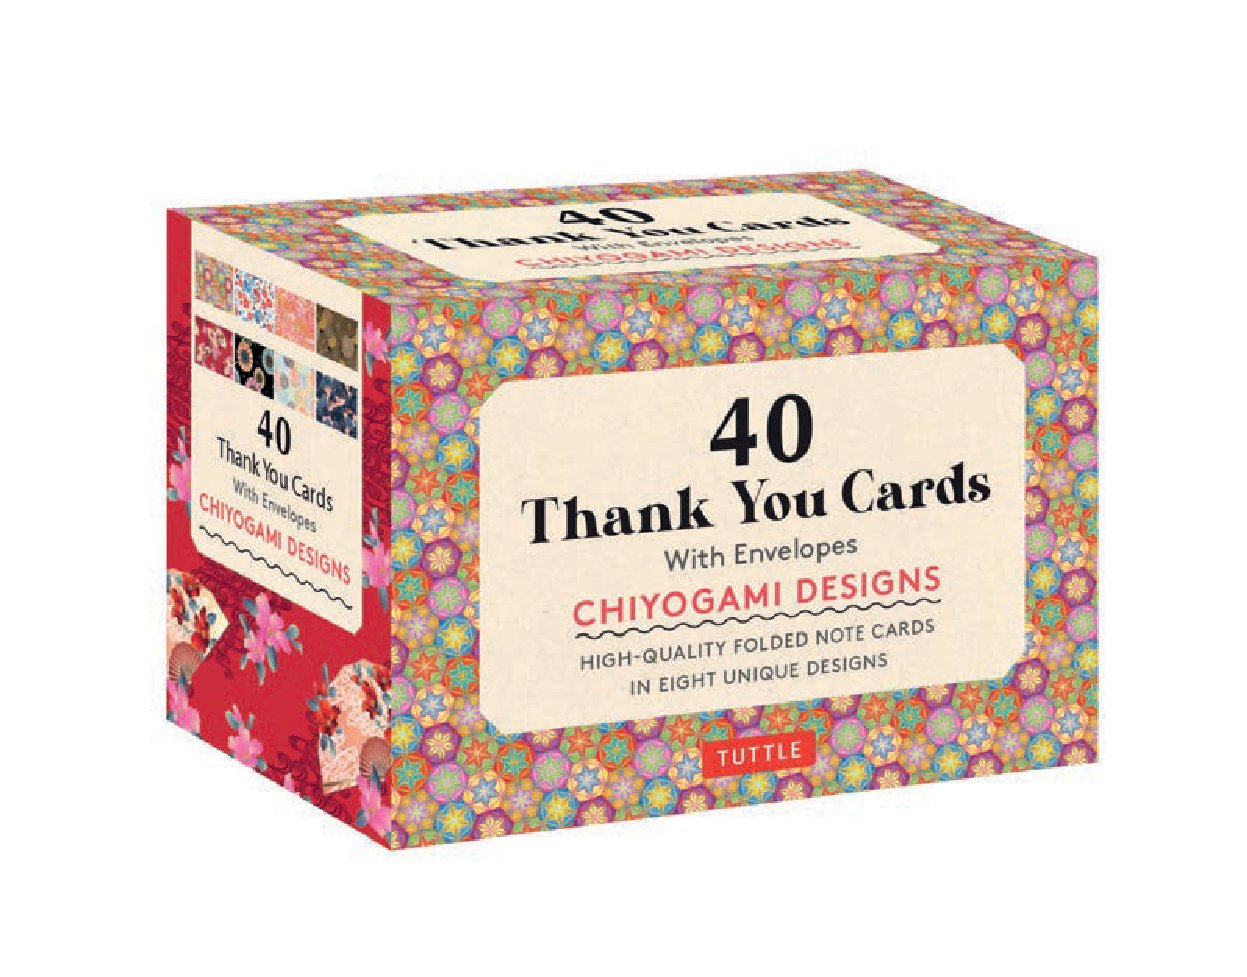 Chiyogami, 40 Thank You Cards with Envelopes